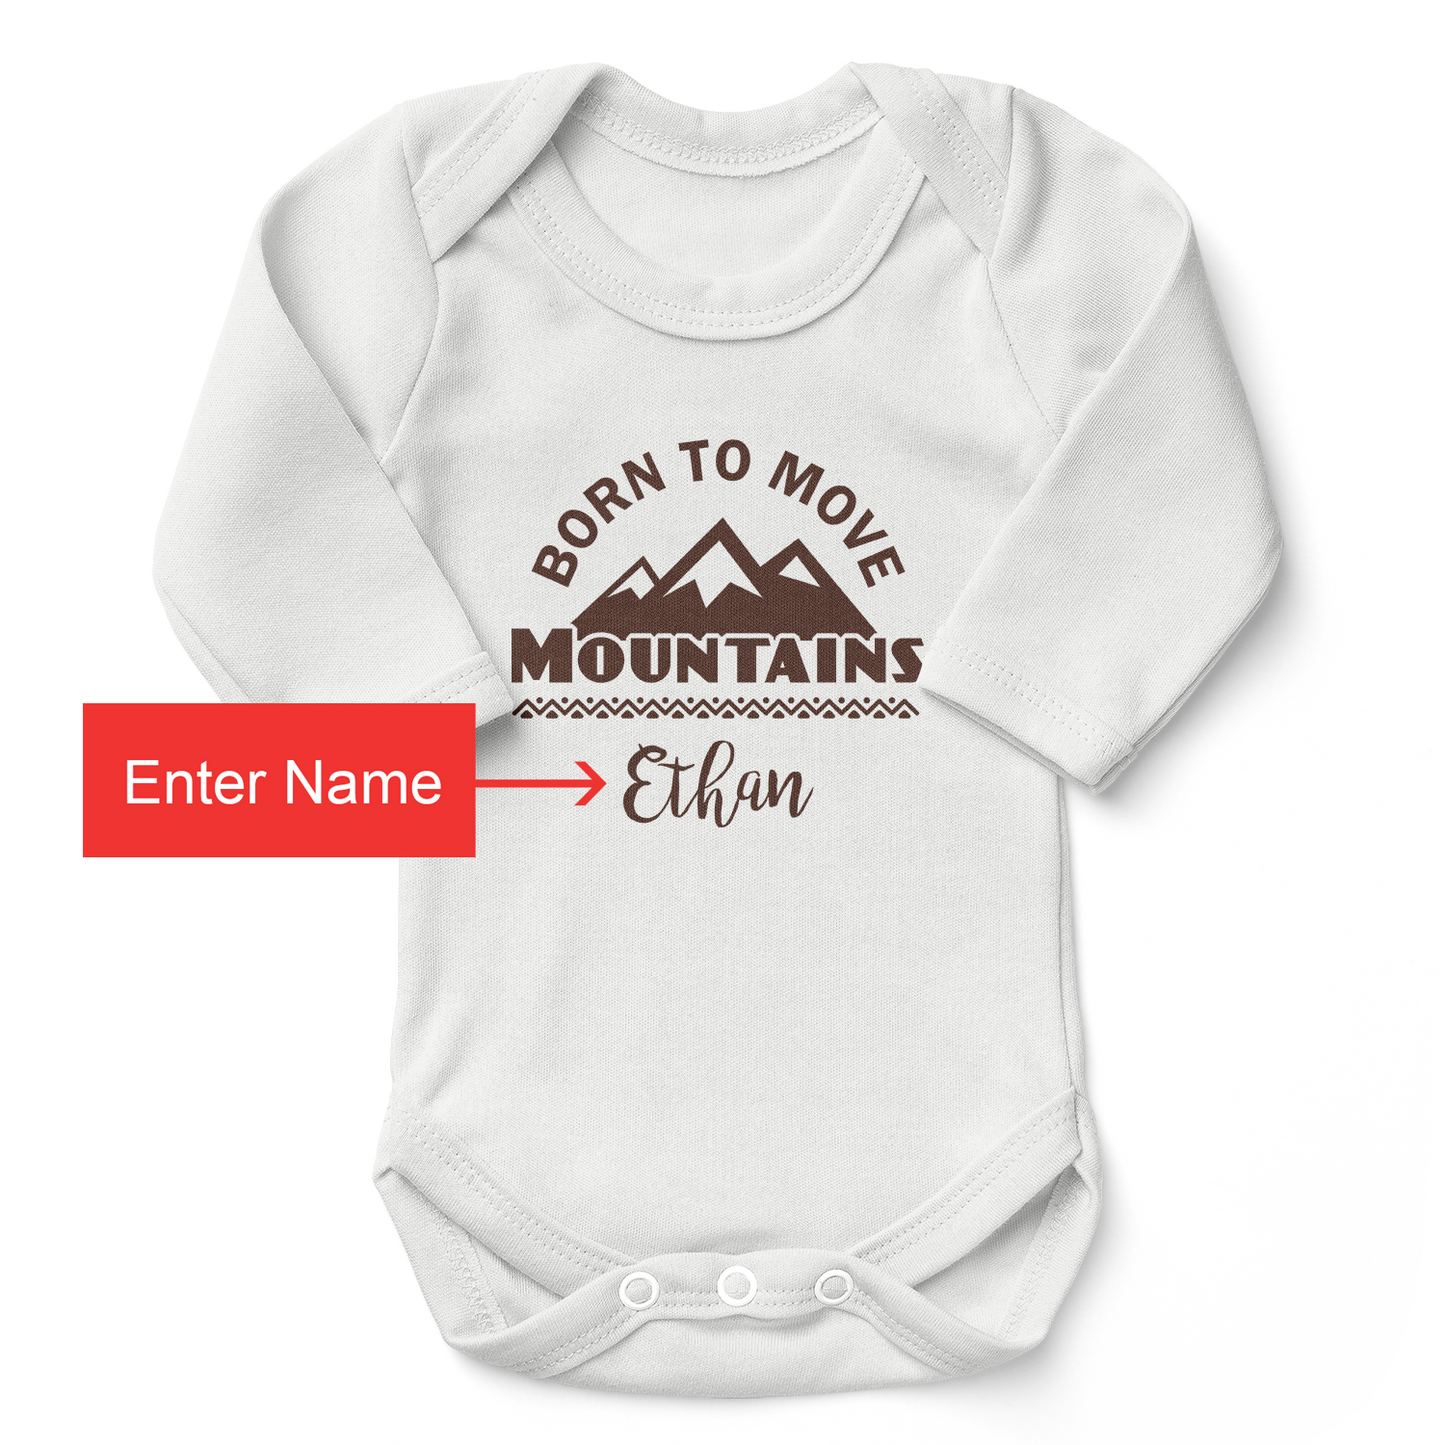 Personalized Organic Baby Bodysuit - Born To Move Mountains (White)